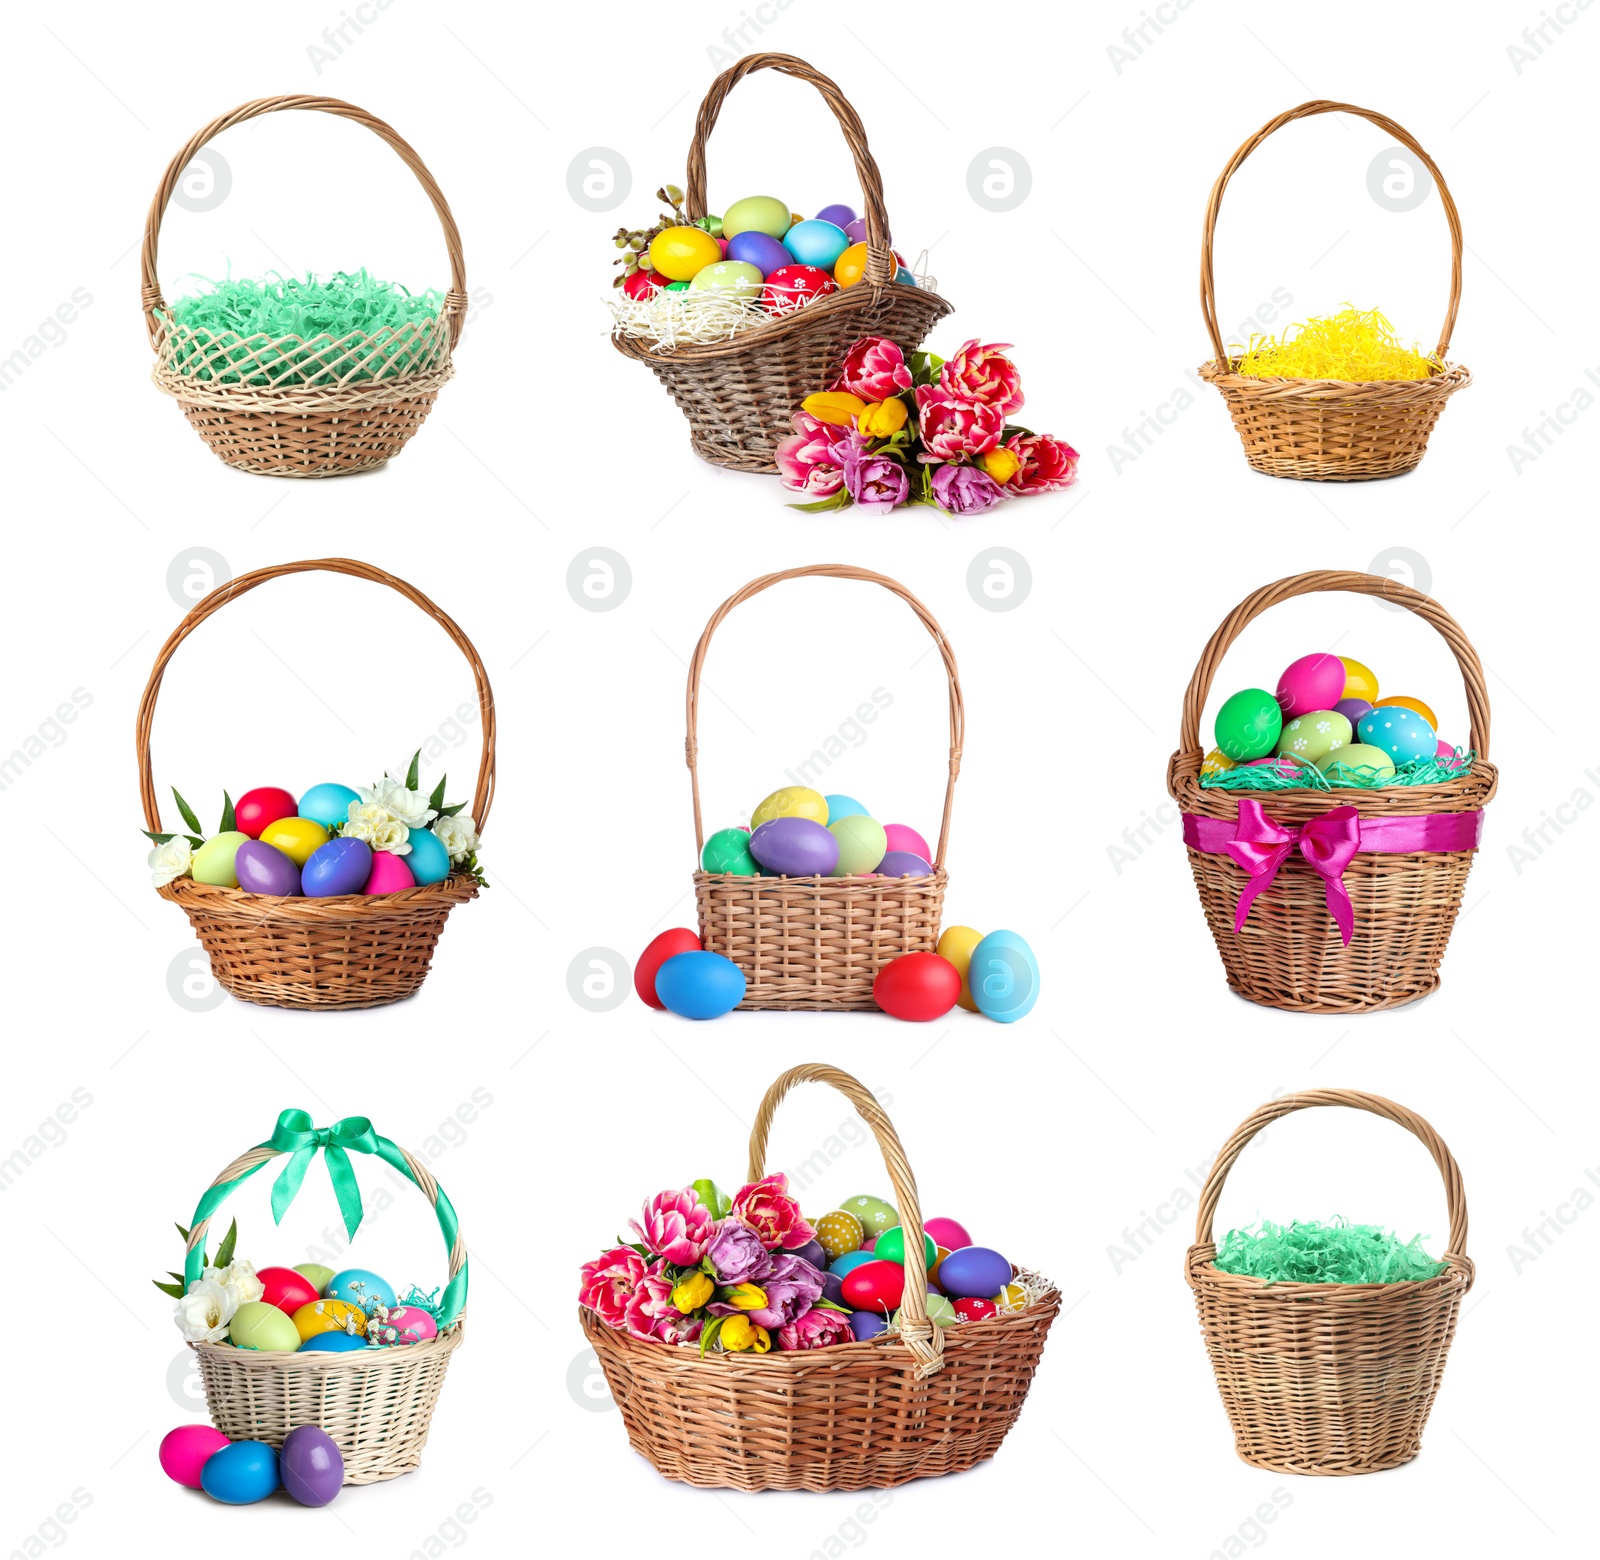 Image of Set with wicker baskets on white background. Easter item